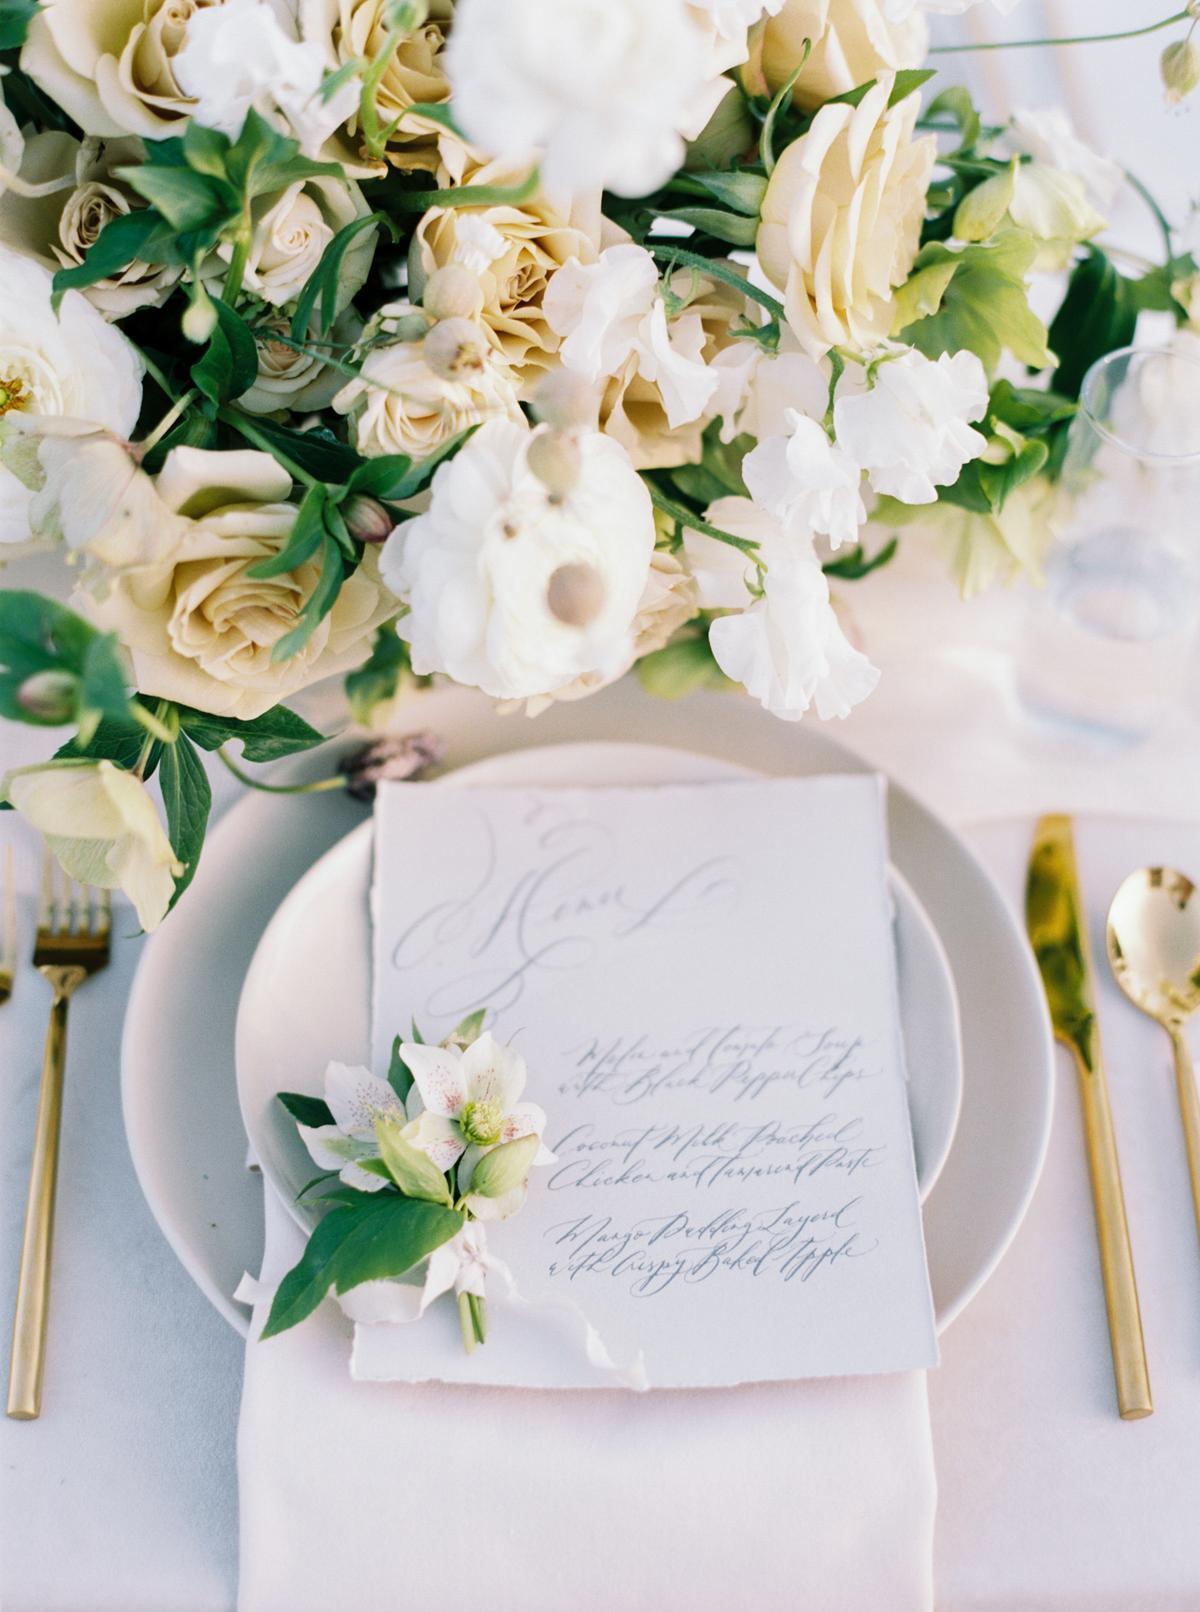 How to Choose a Wedding Stationer That’s Right for You